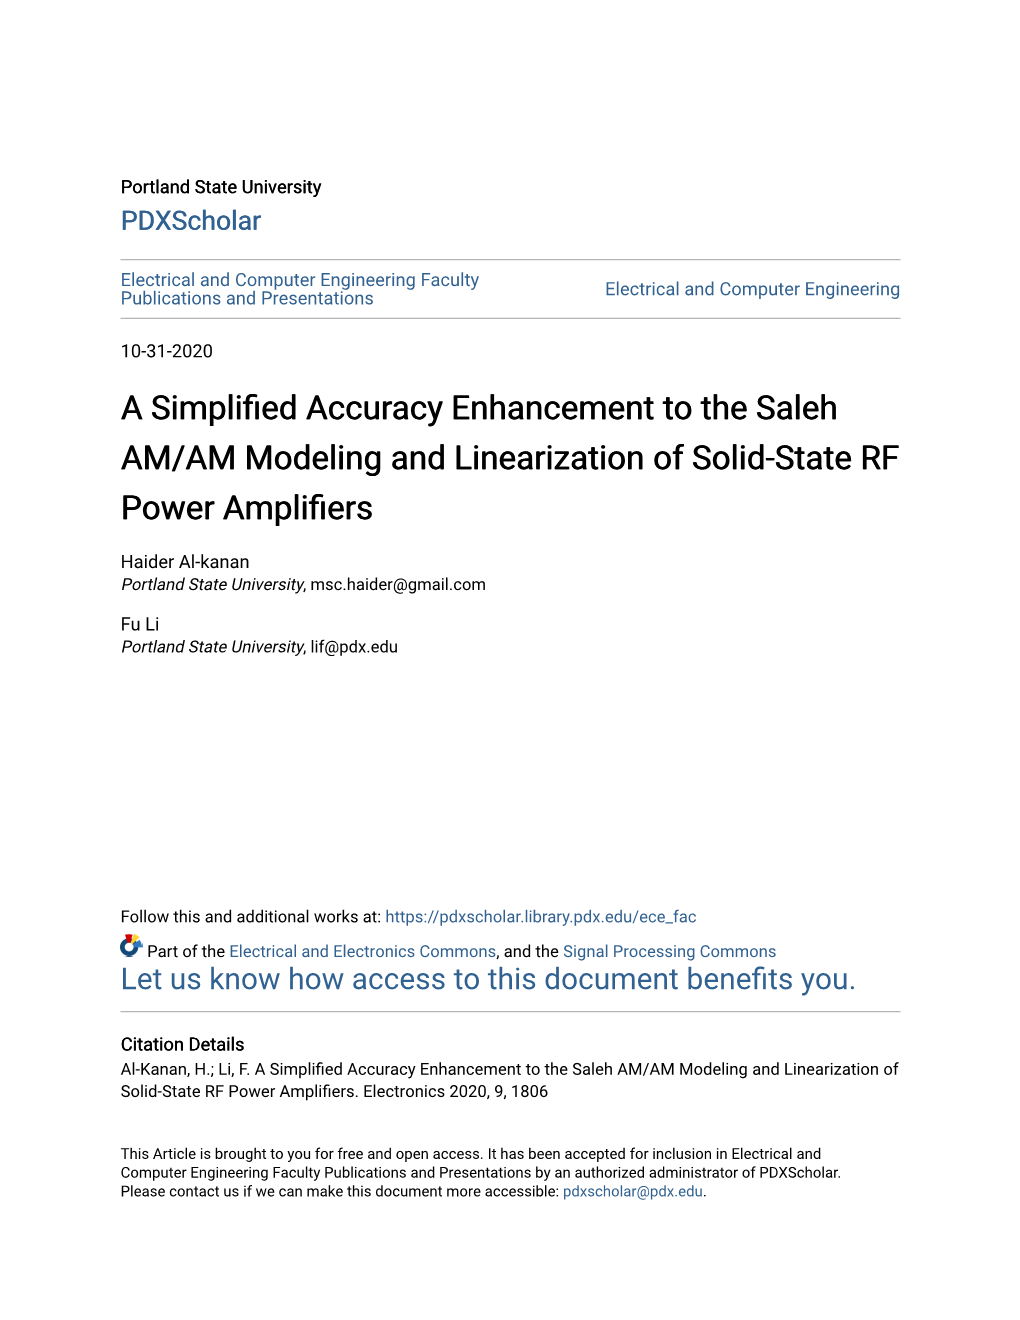 A Simplified Accuracy Enhancement to the Saleh AM/AM Modeling and Linearization of Solid-State RF Power Amplifiers